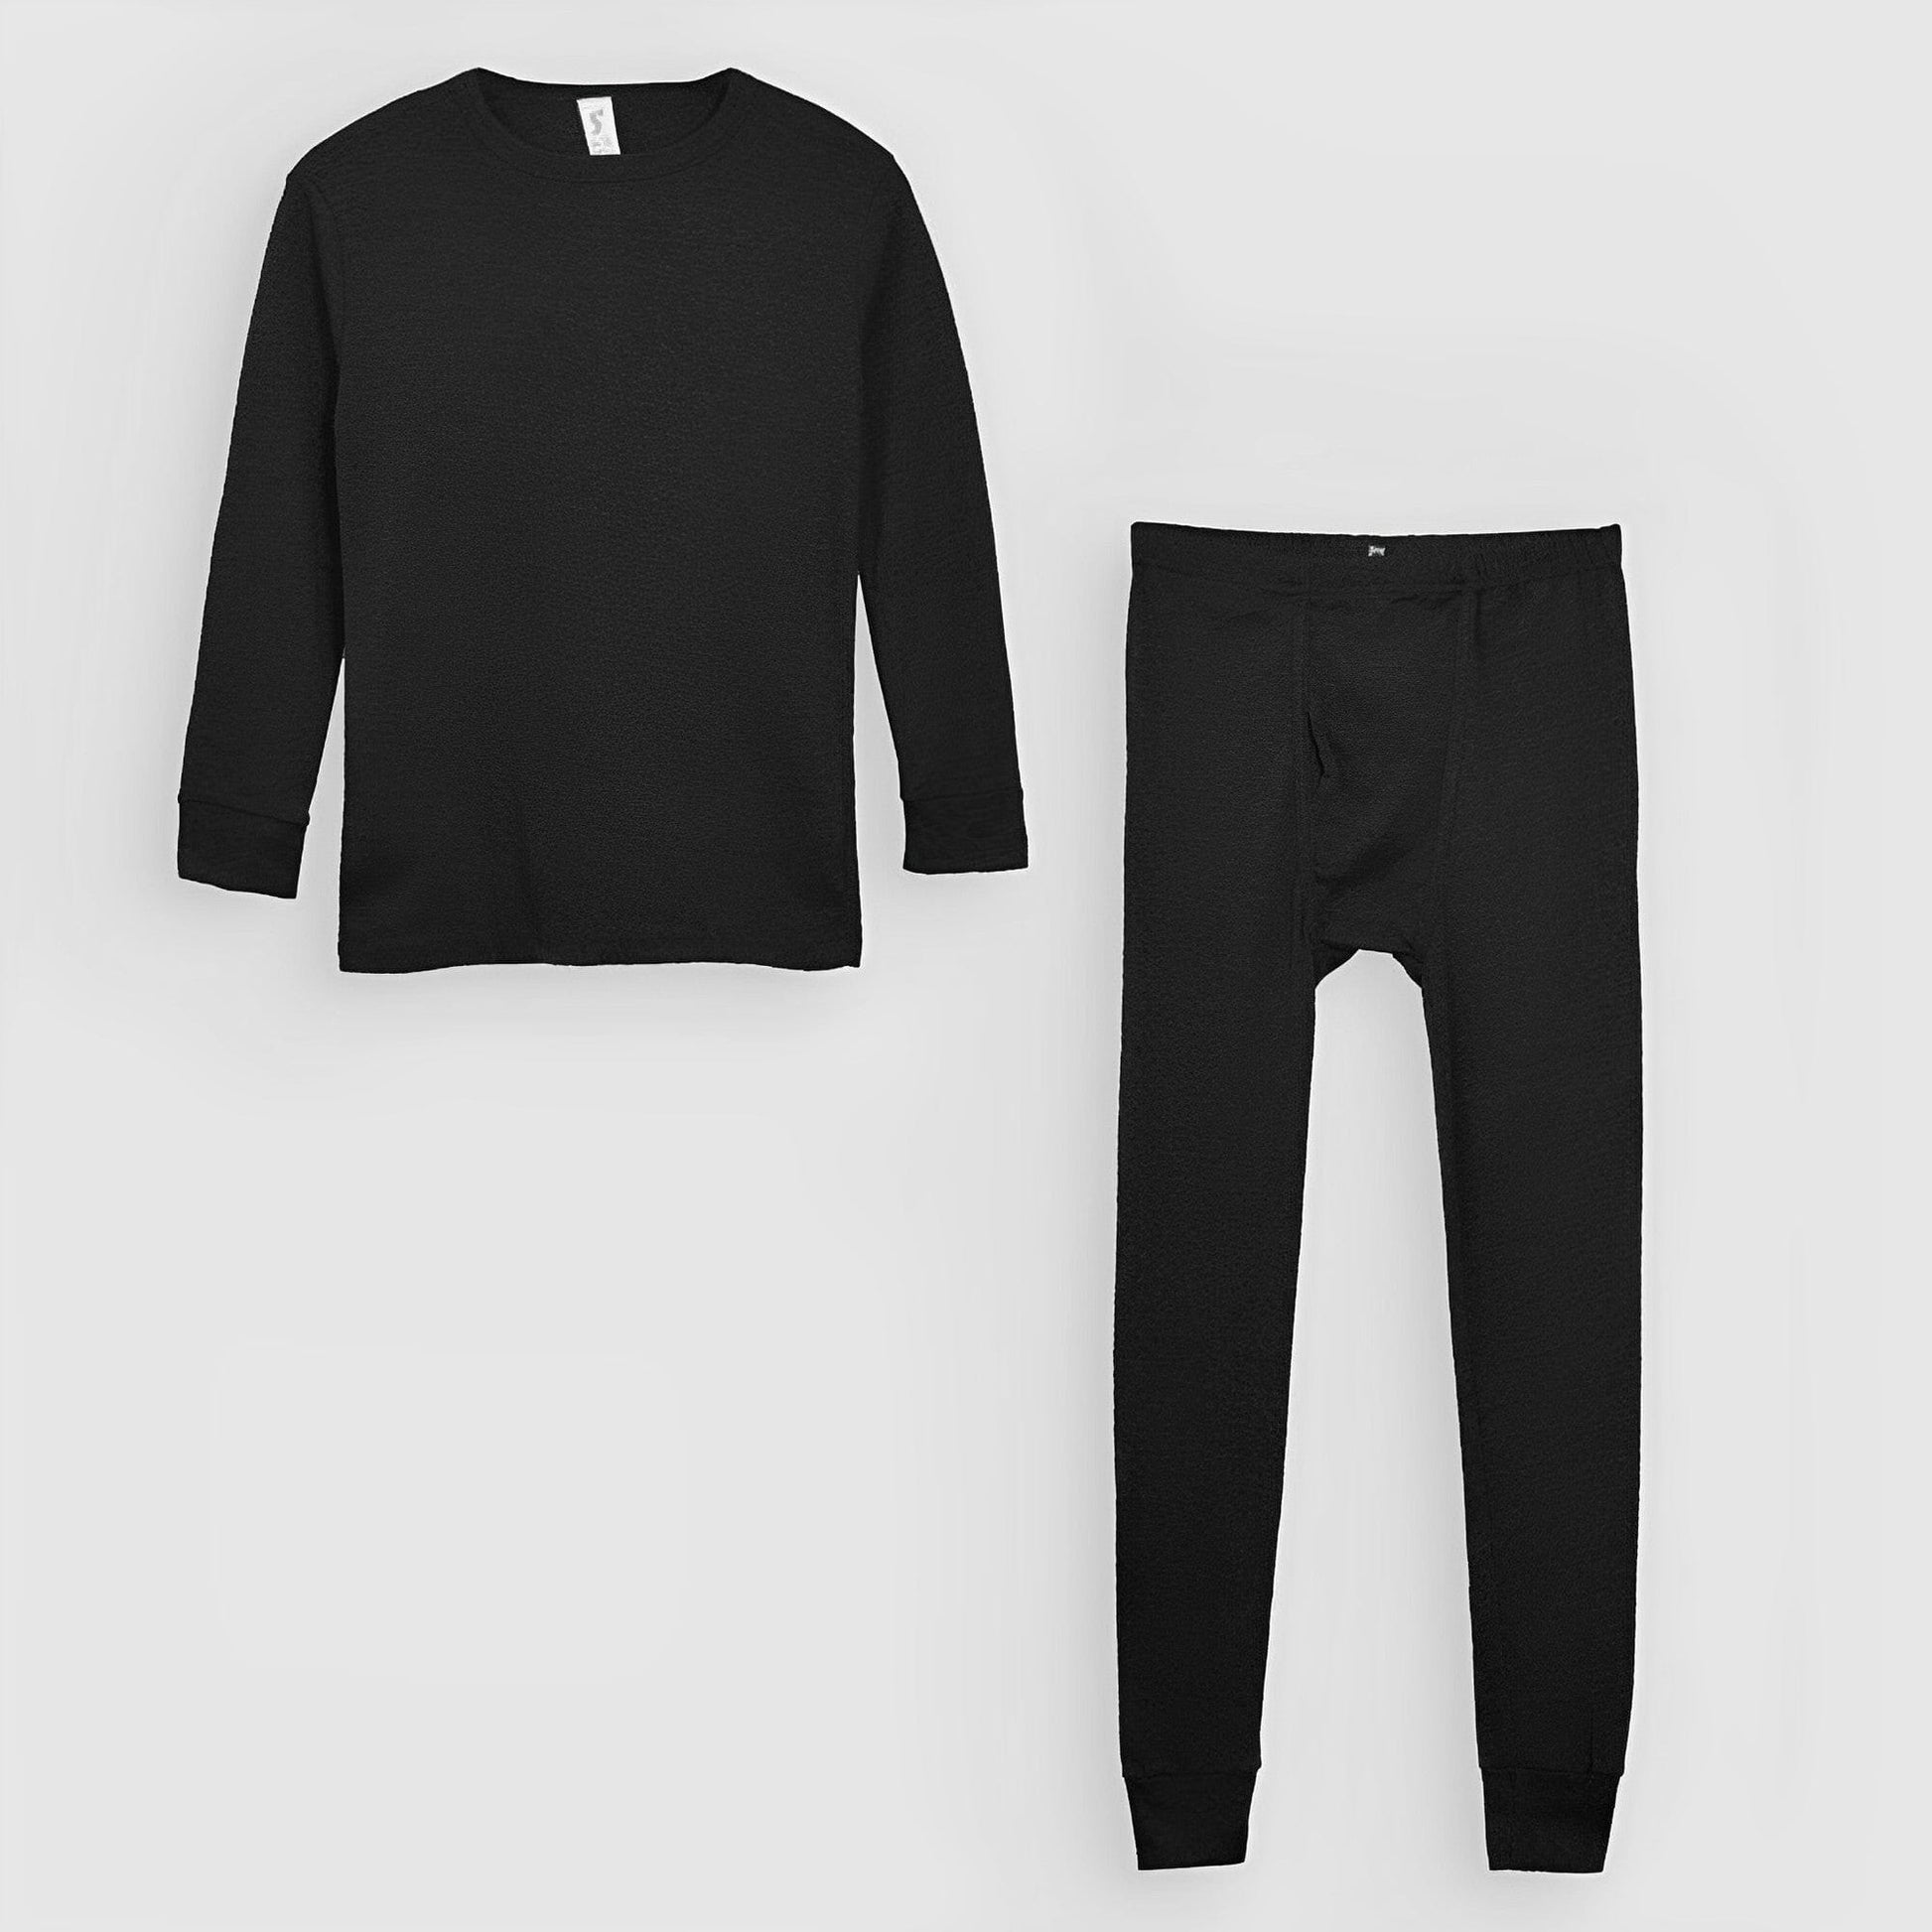 Buy online Black Cotton Thermal from innerwear & thermals for